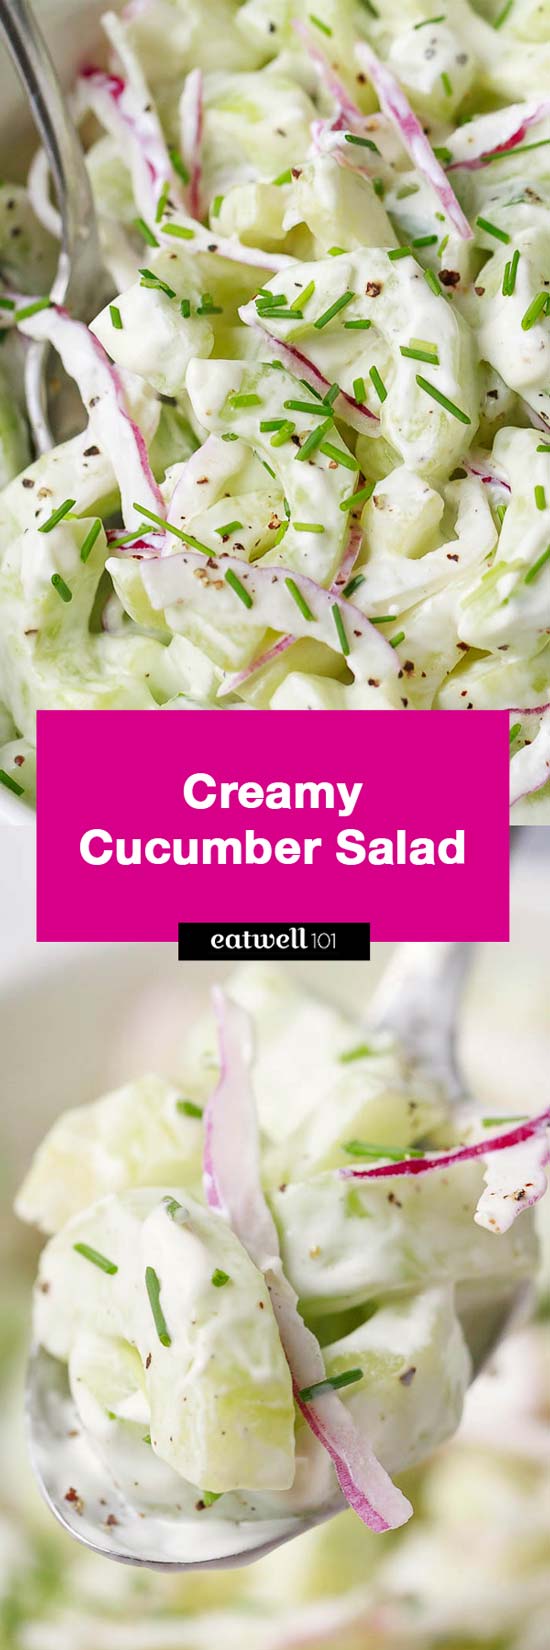 Creamy Cucumber Salad - #cucumber #salad #recipe #eatwell101 - A delicious, refreshing salad you can serve as a great side for your grilling cookouts or on its own for a light dinner. 